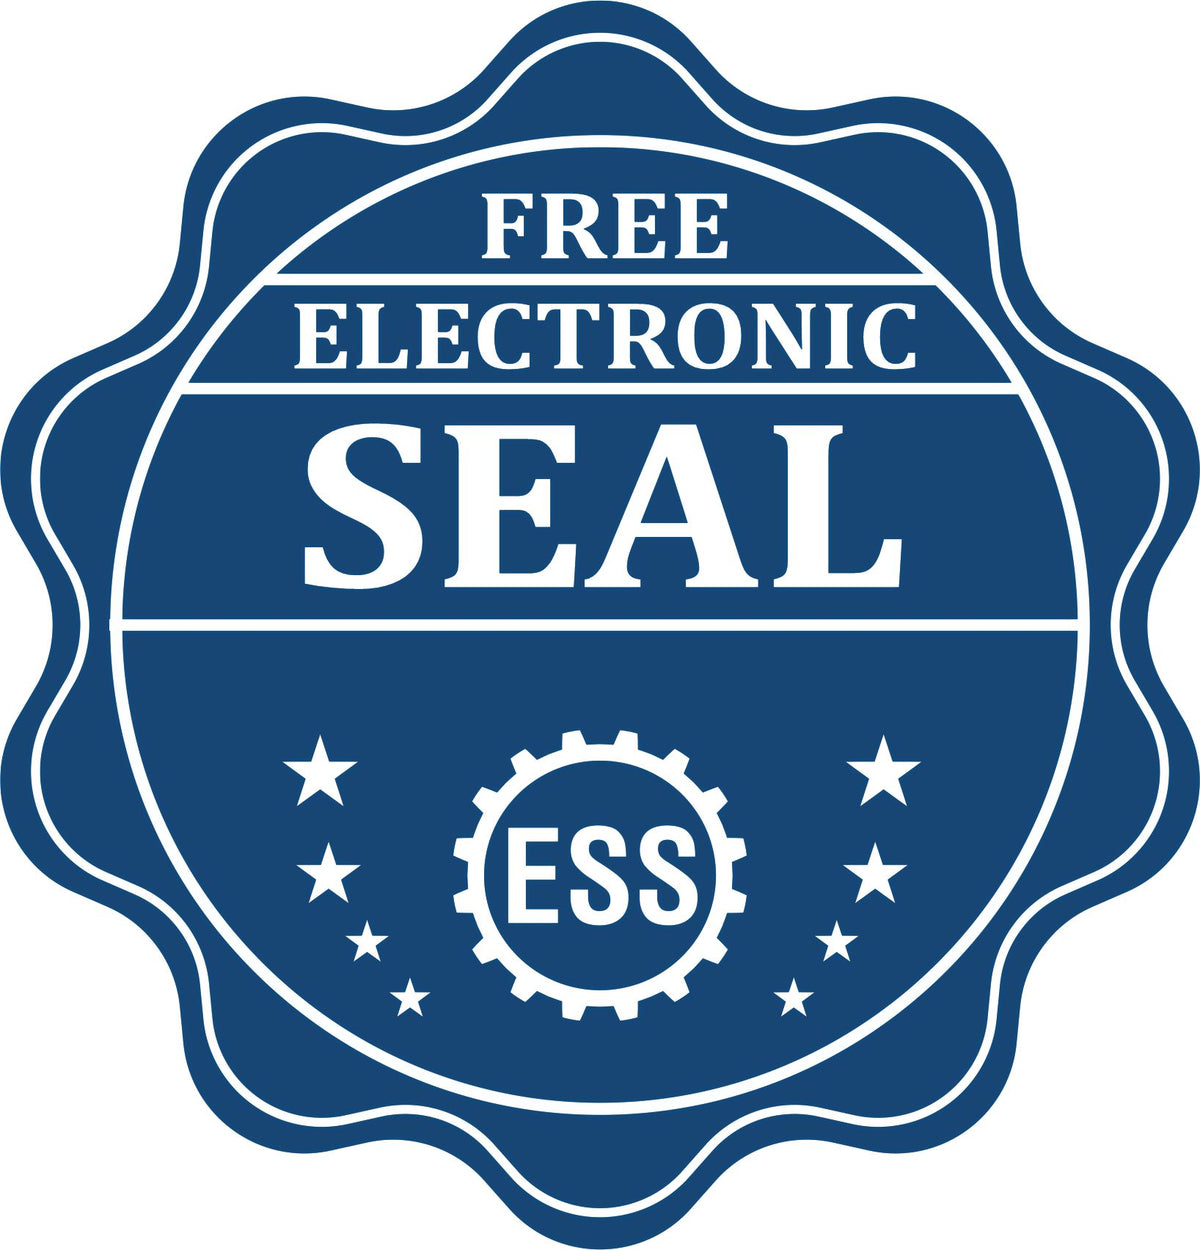 A badge showing a free electronic seal for the Hybrid North Dakota Geologist Seal with stars and the ESS gear on the emblem.